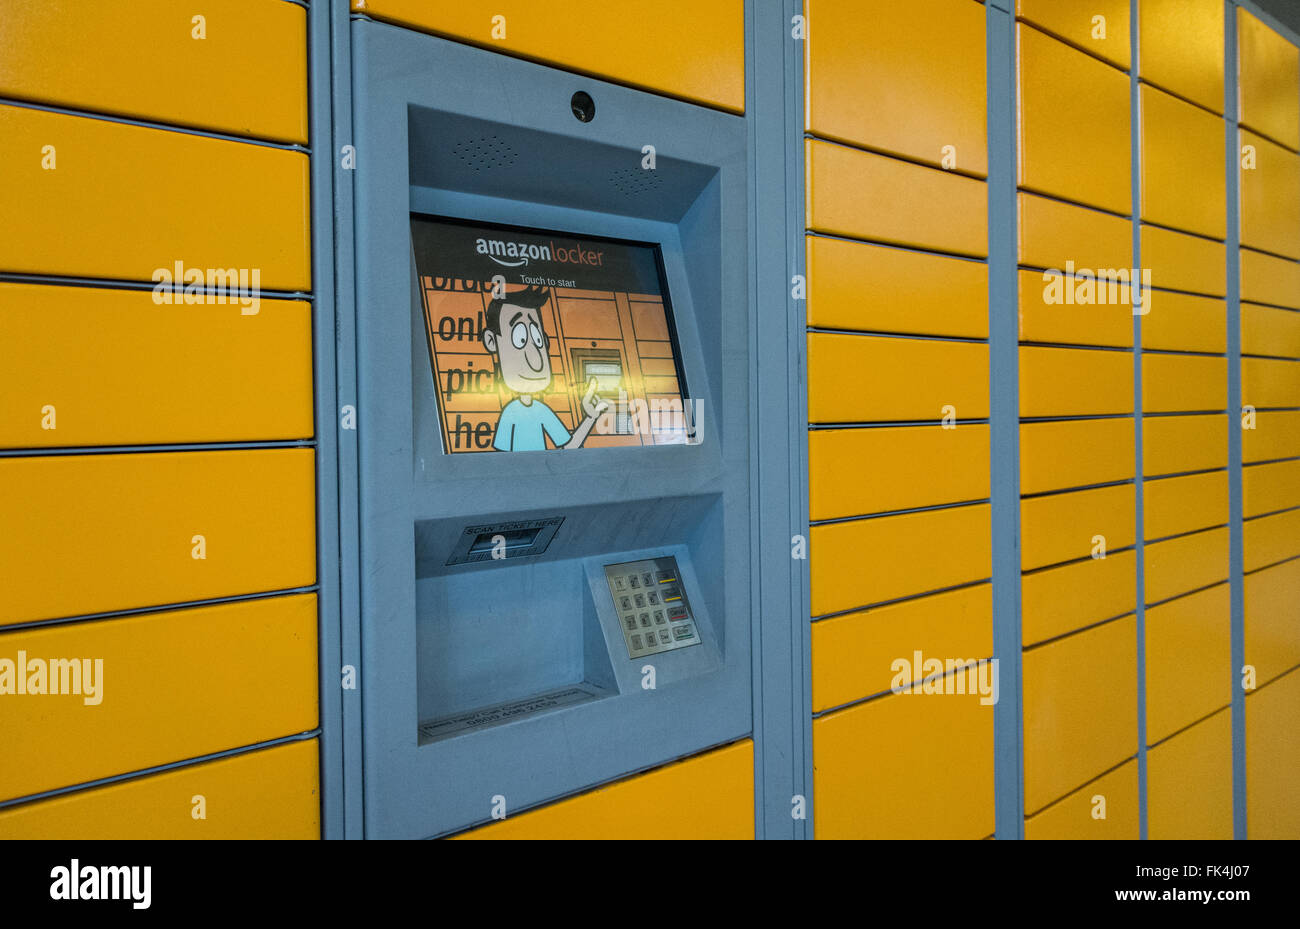 Amazon locker and pick-up point in Hammersmith Broadway shopping Centre, London, England, UK. Stock Photo